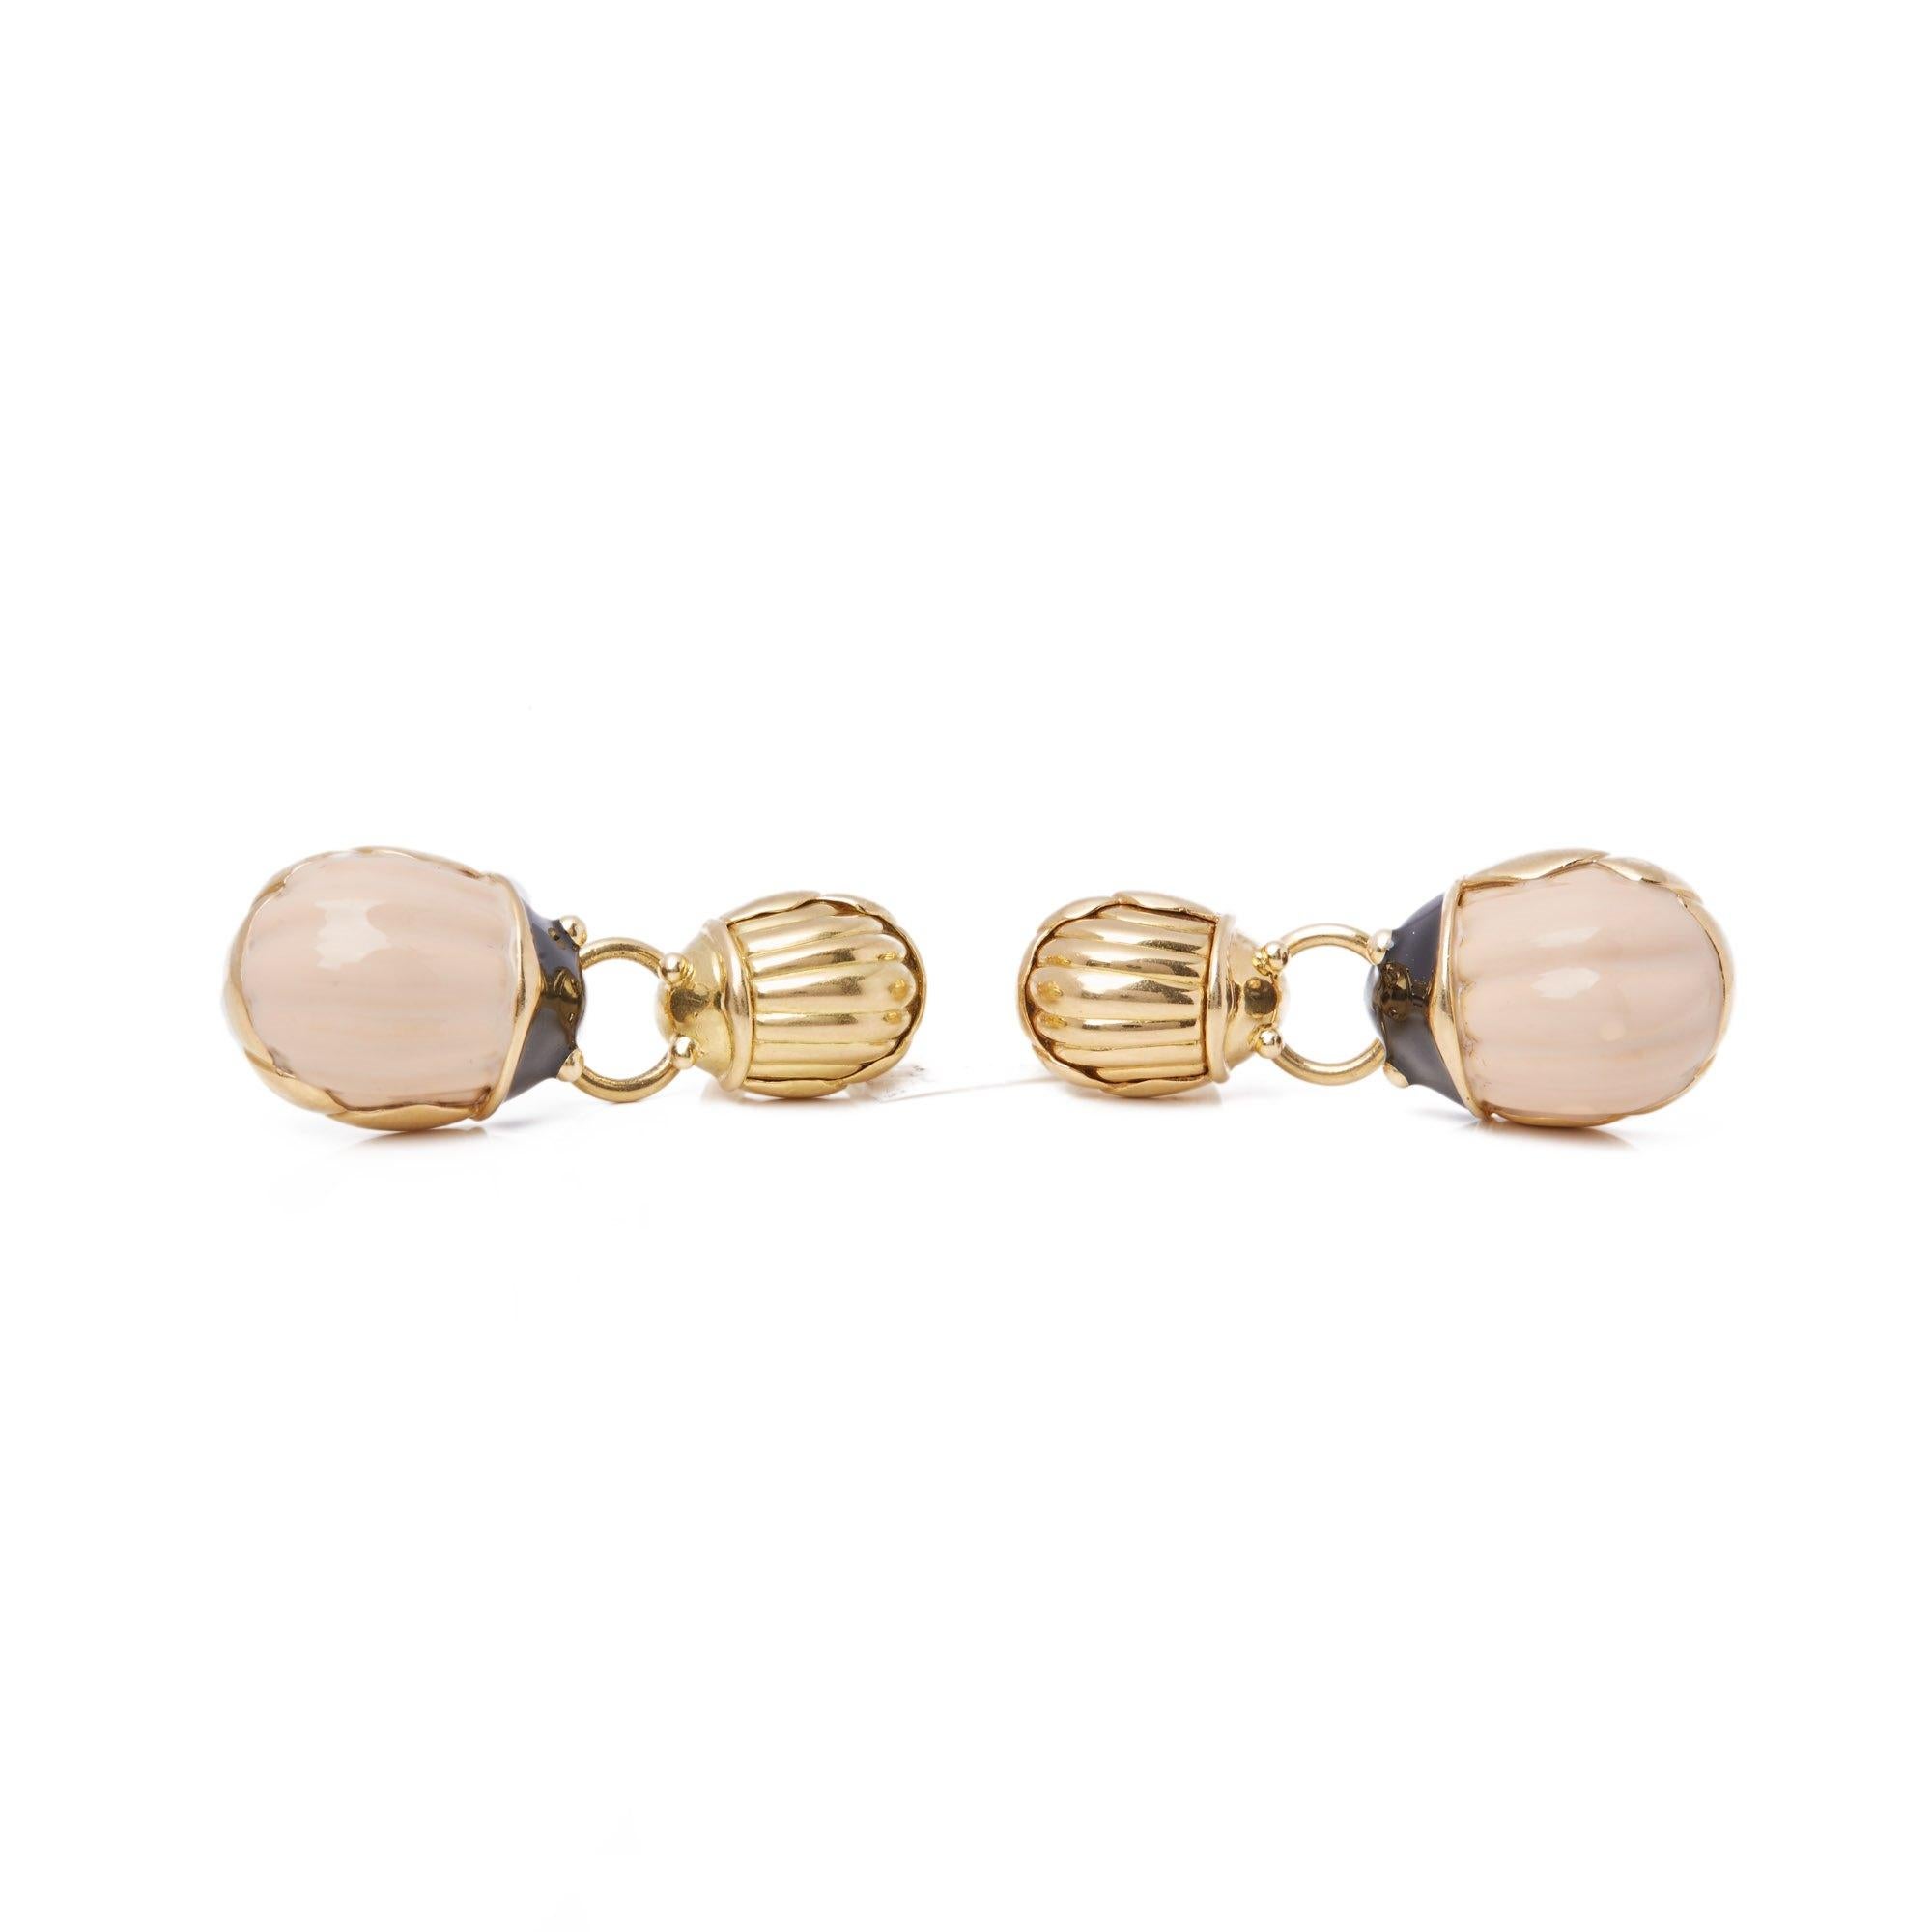 These Earrings by Tiffany & Co feature Two Graduated Beetle Sections set with Enamel Mounted in 18k Yellow Gold With Omega Fittings. 